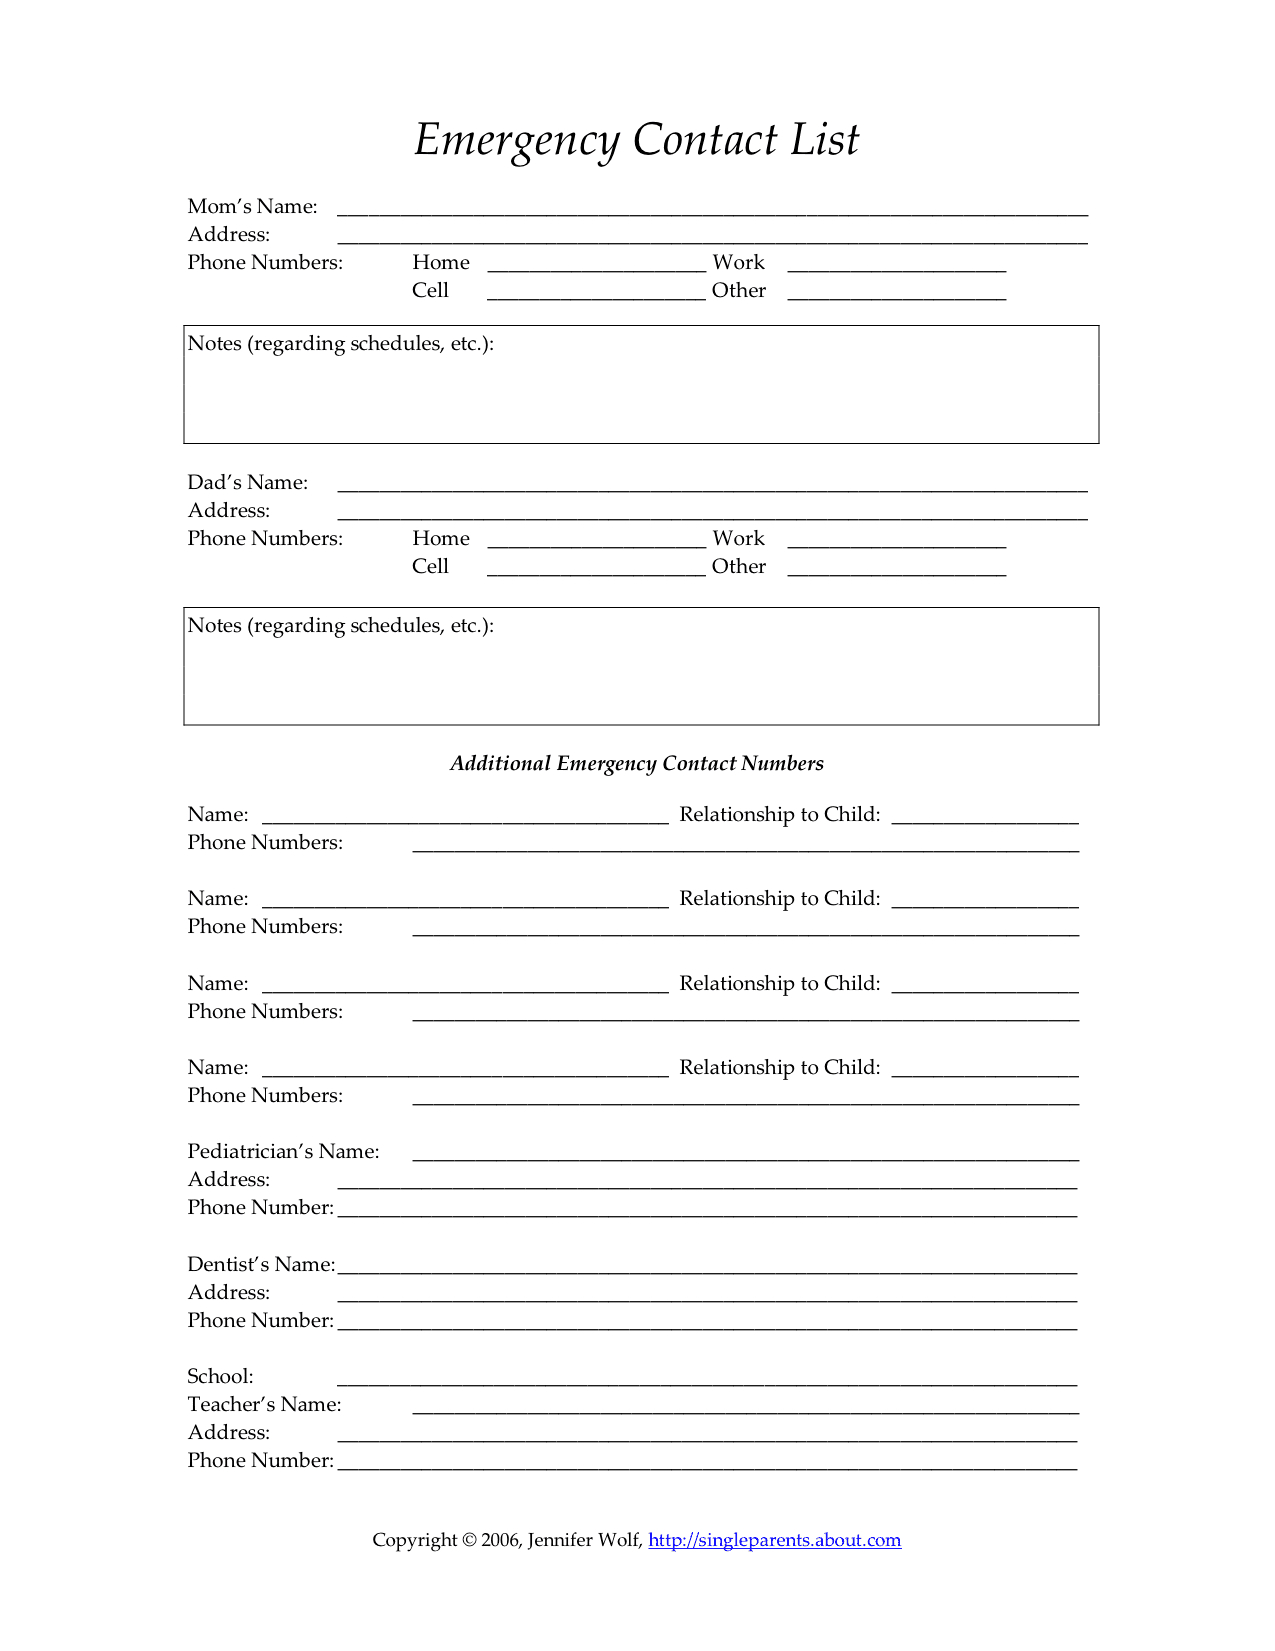 Child's Emergency Contact Form | Single Parent Families Throughout Emergency Contact Card Template